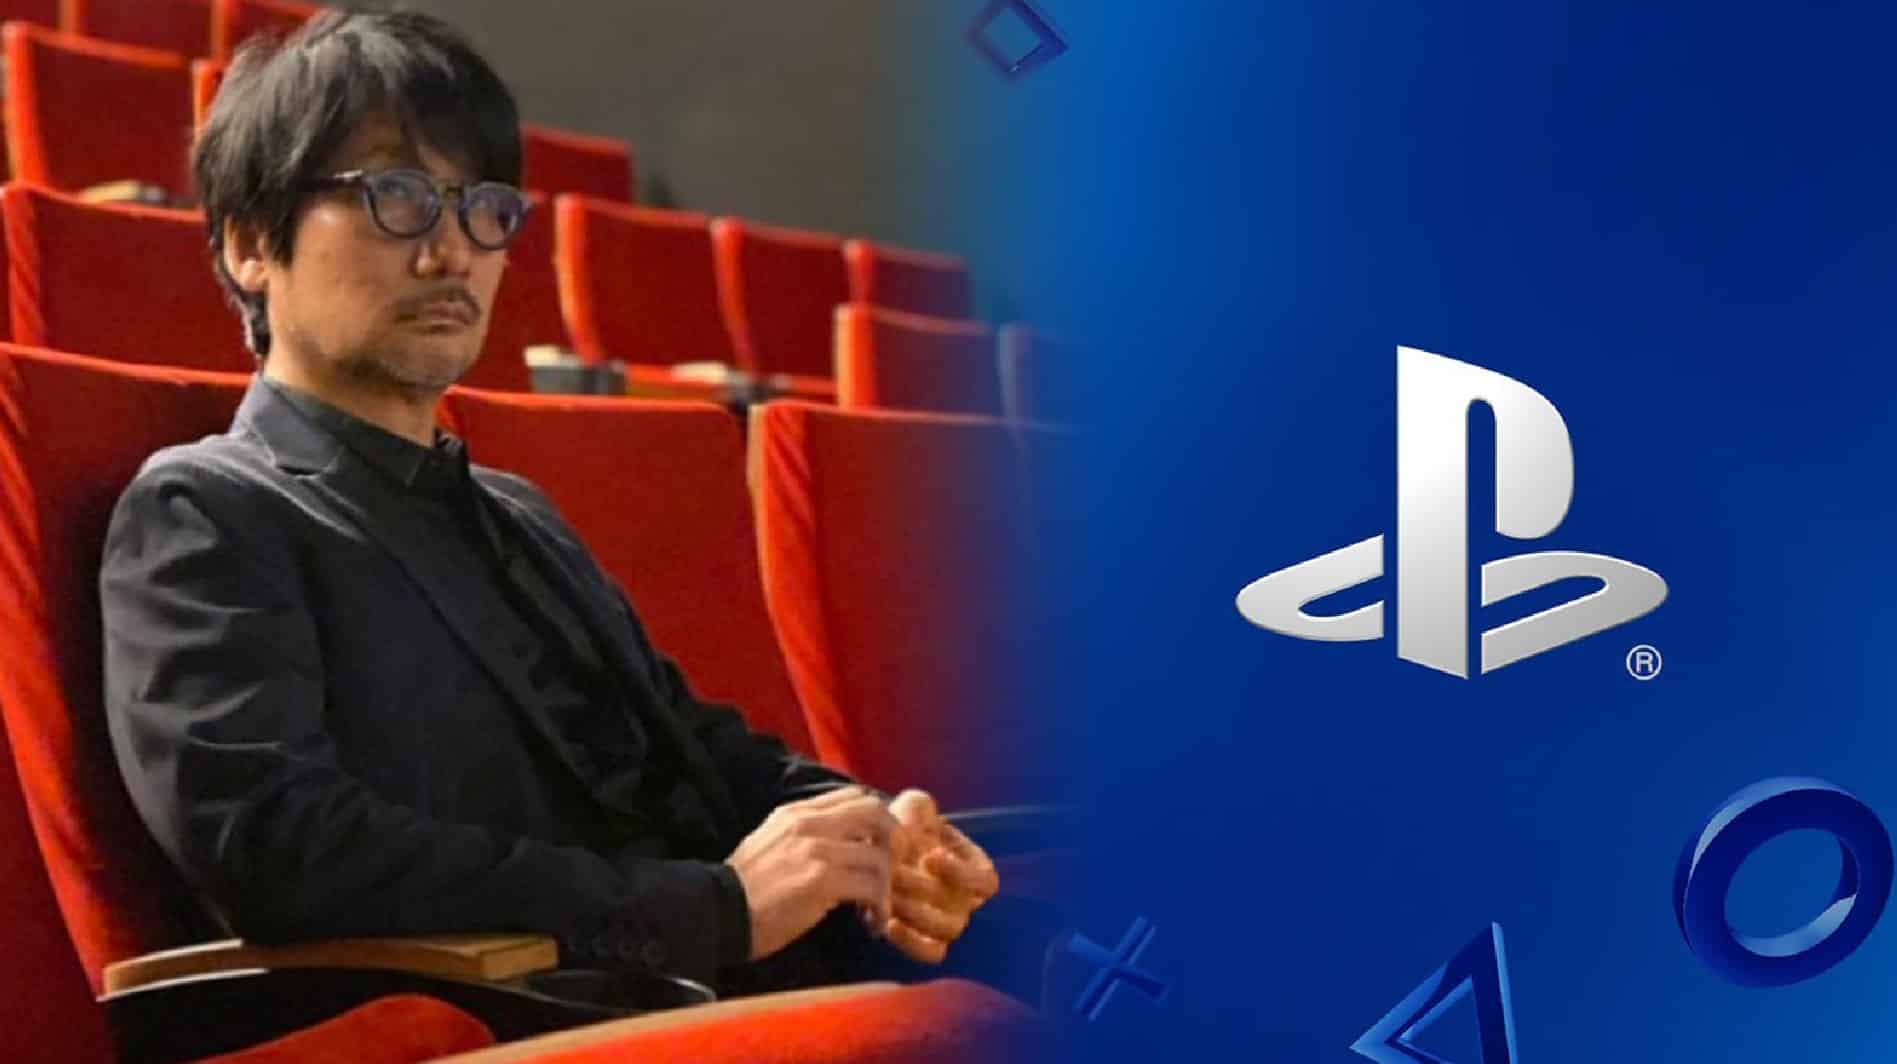 Are Keanu Reeves and Hideo Kojima teaming up? - Dexerto